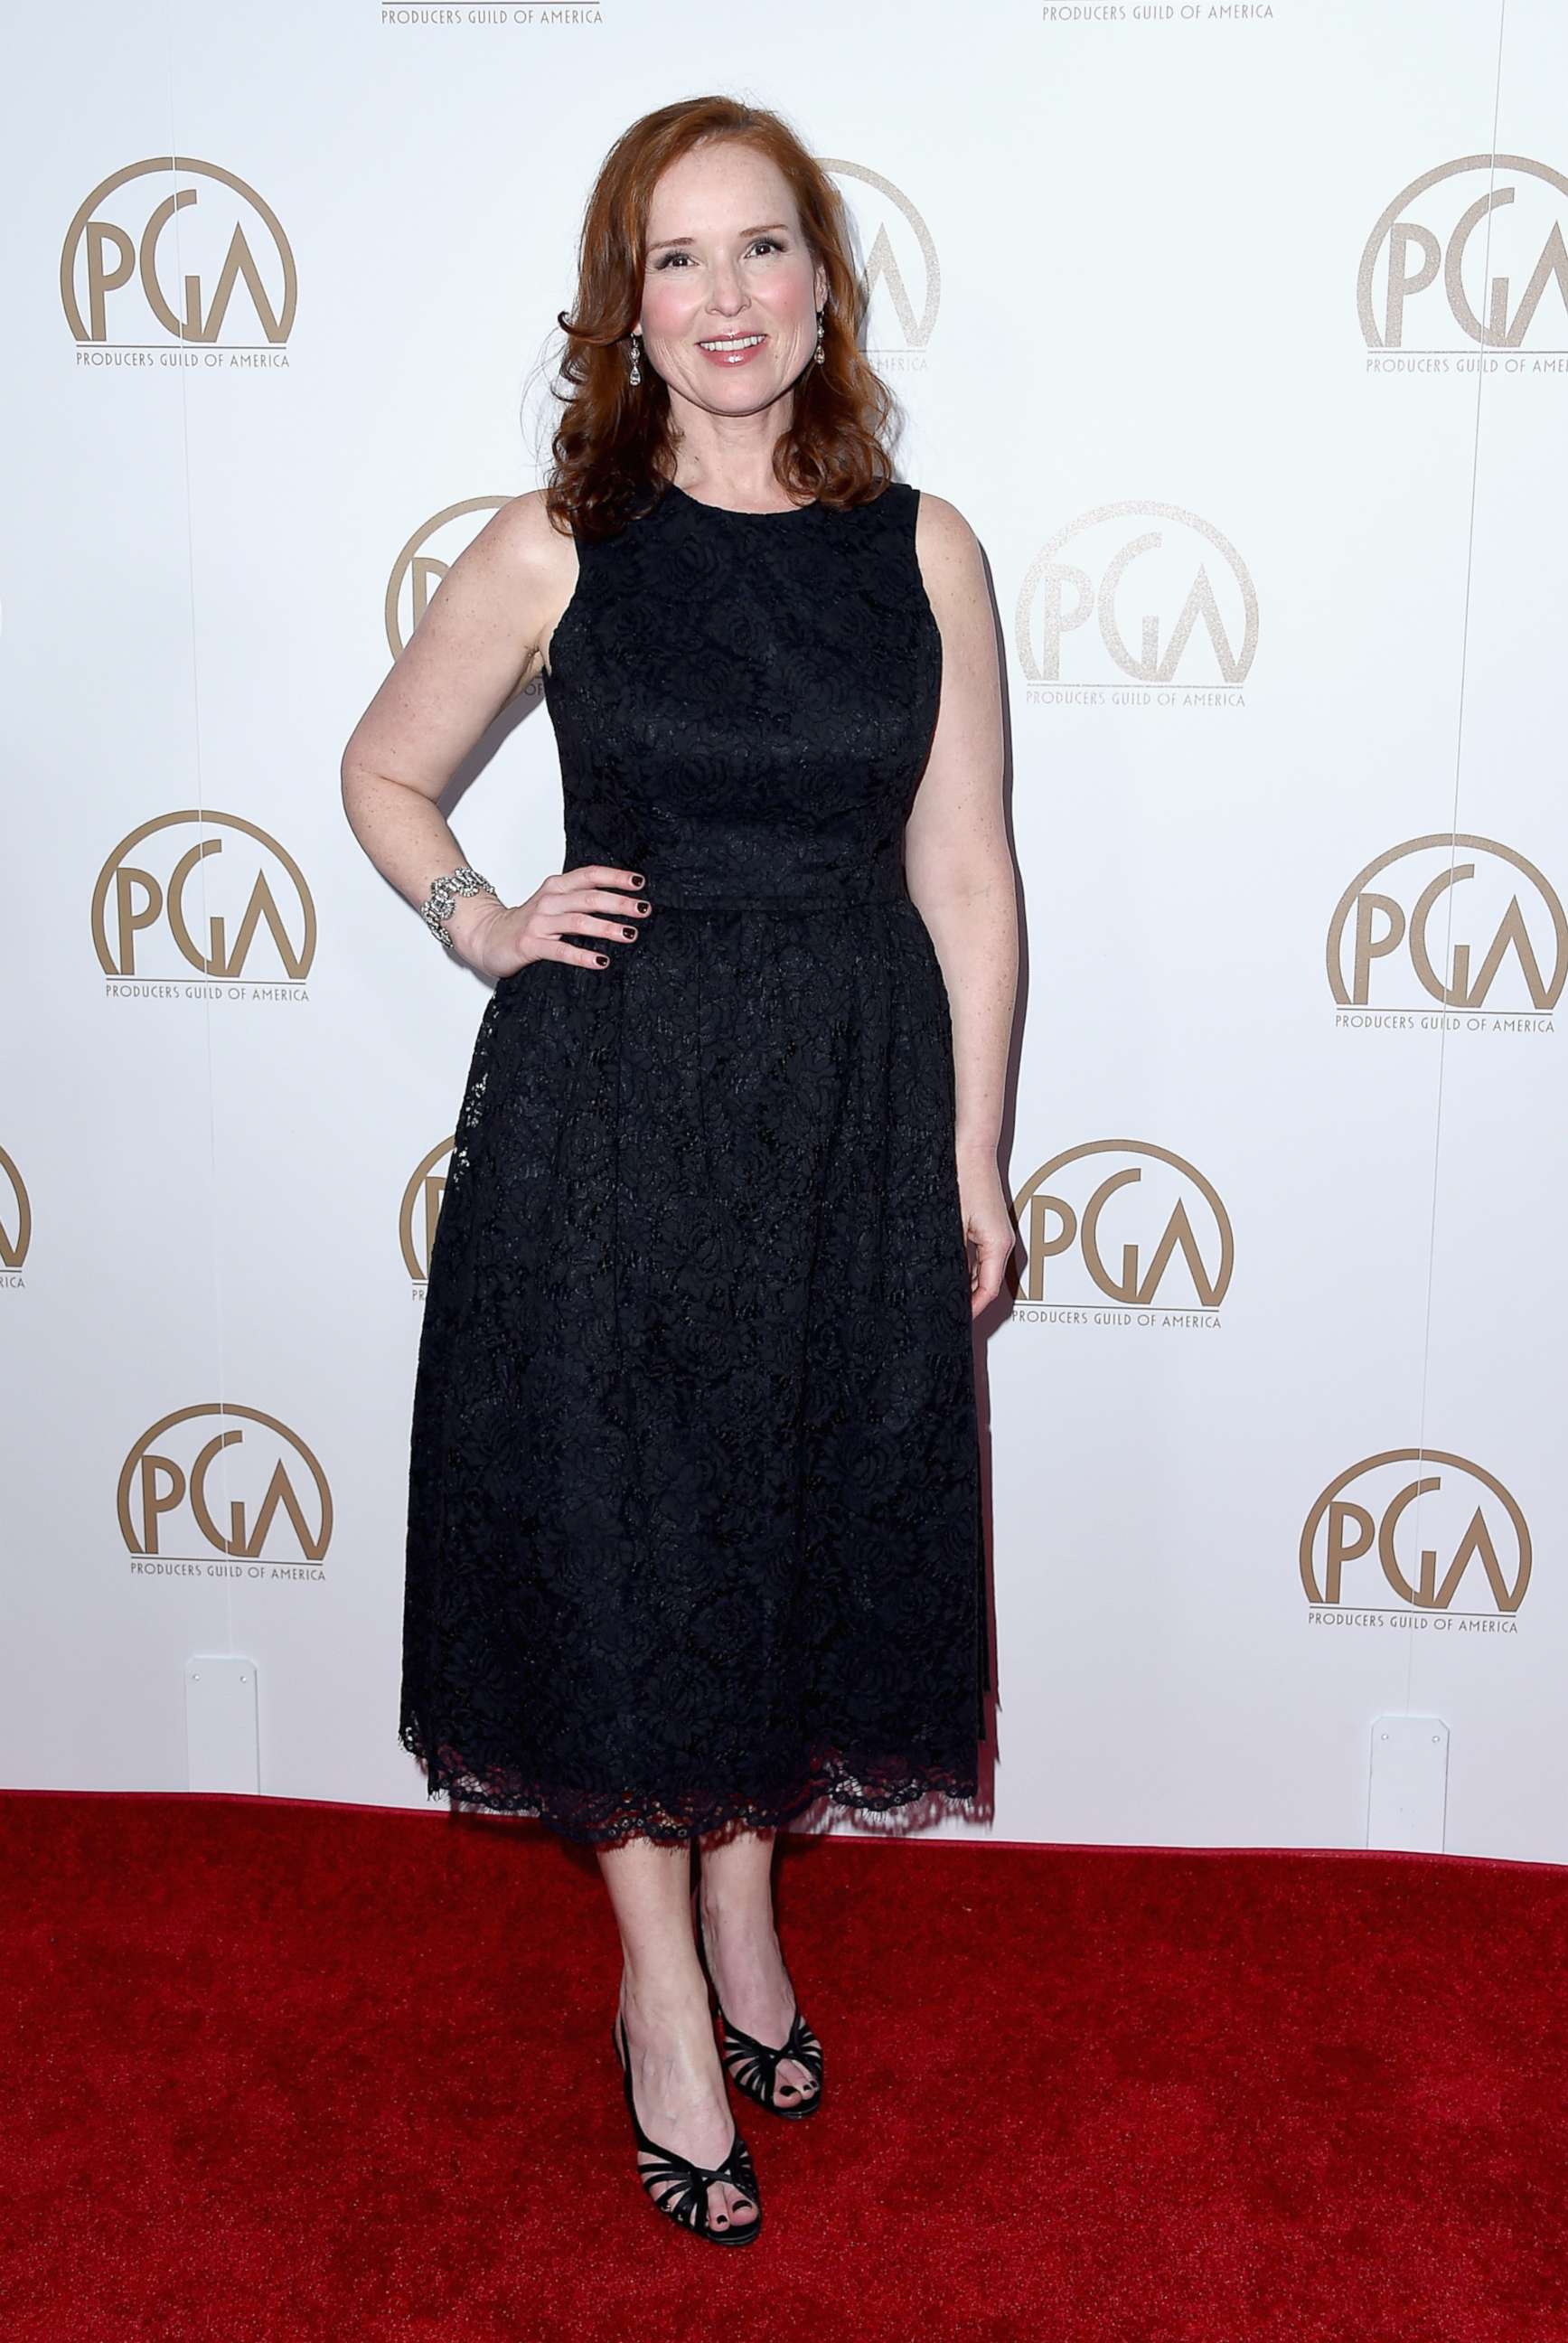 PHOTO: Jennifer Todd attends the 27th Annual Producers Guild Awards at the Hyatt Regency Century Plaza, Jan. 23, 2016, in Century City, Calif. 